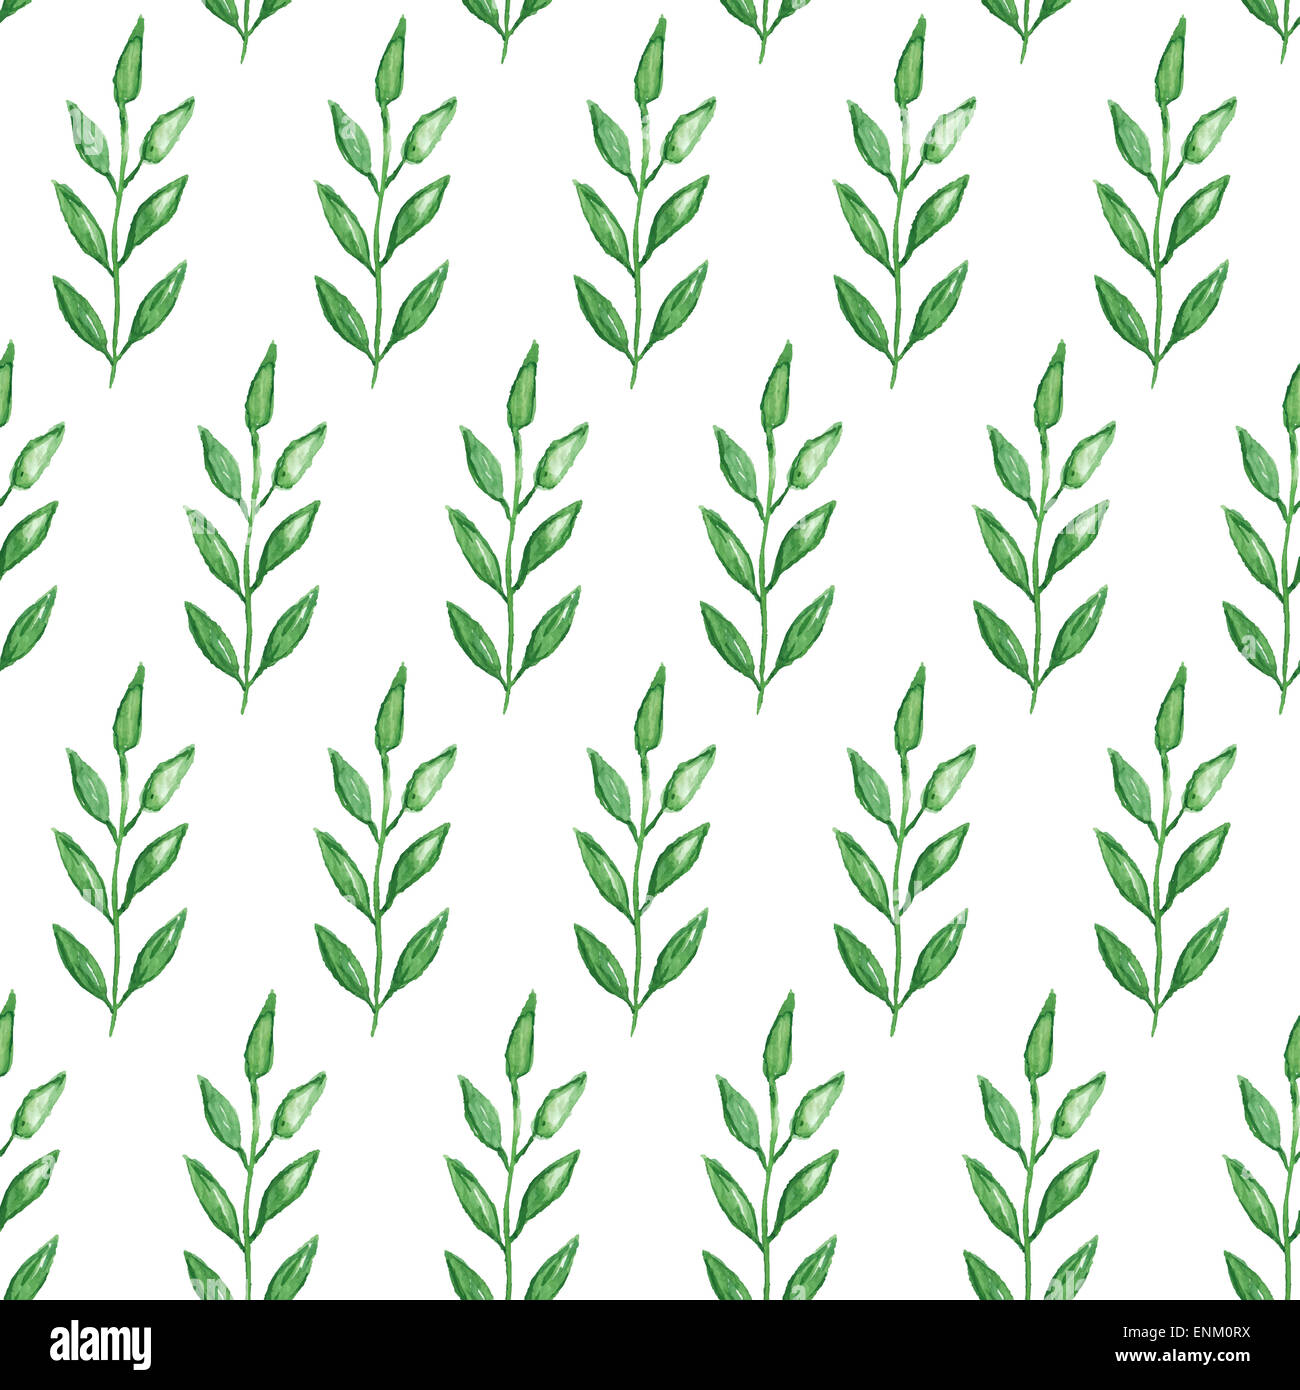 Seamless hand painted green herb pattern Stock Photo - Alamy